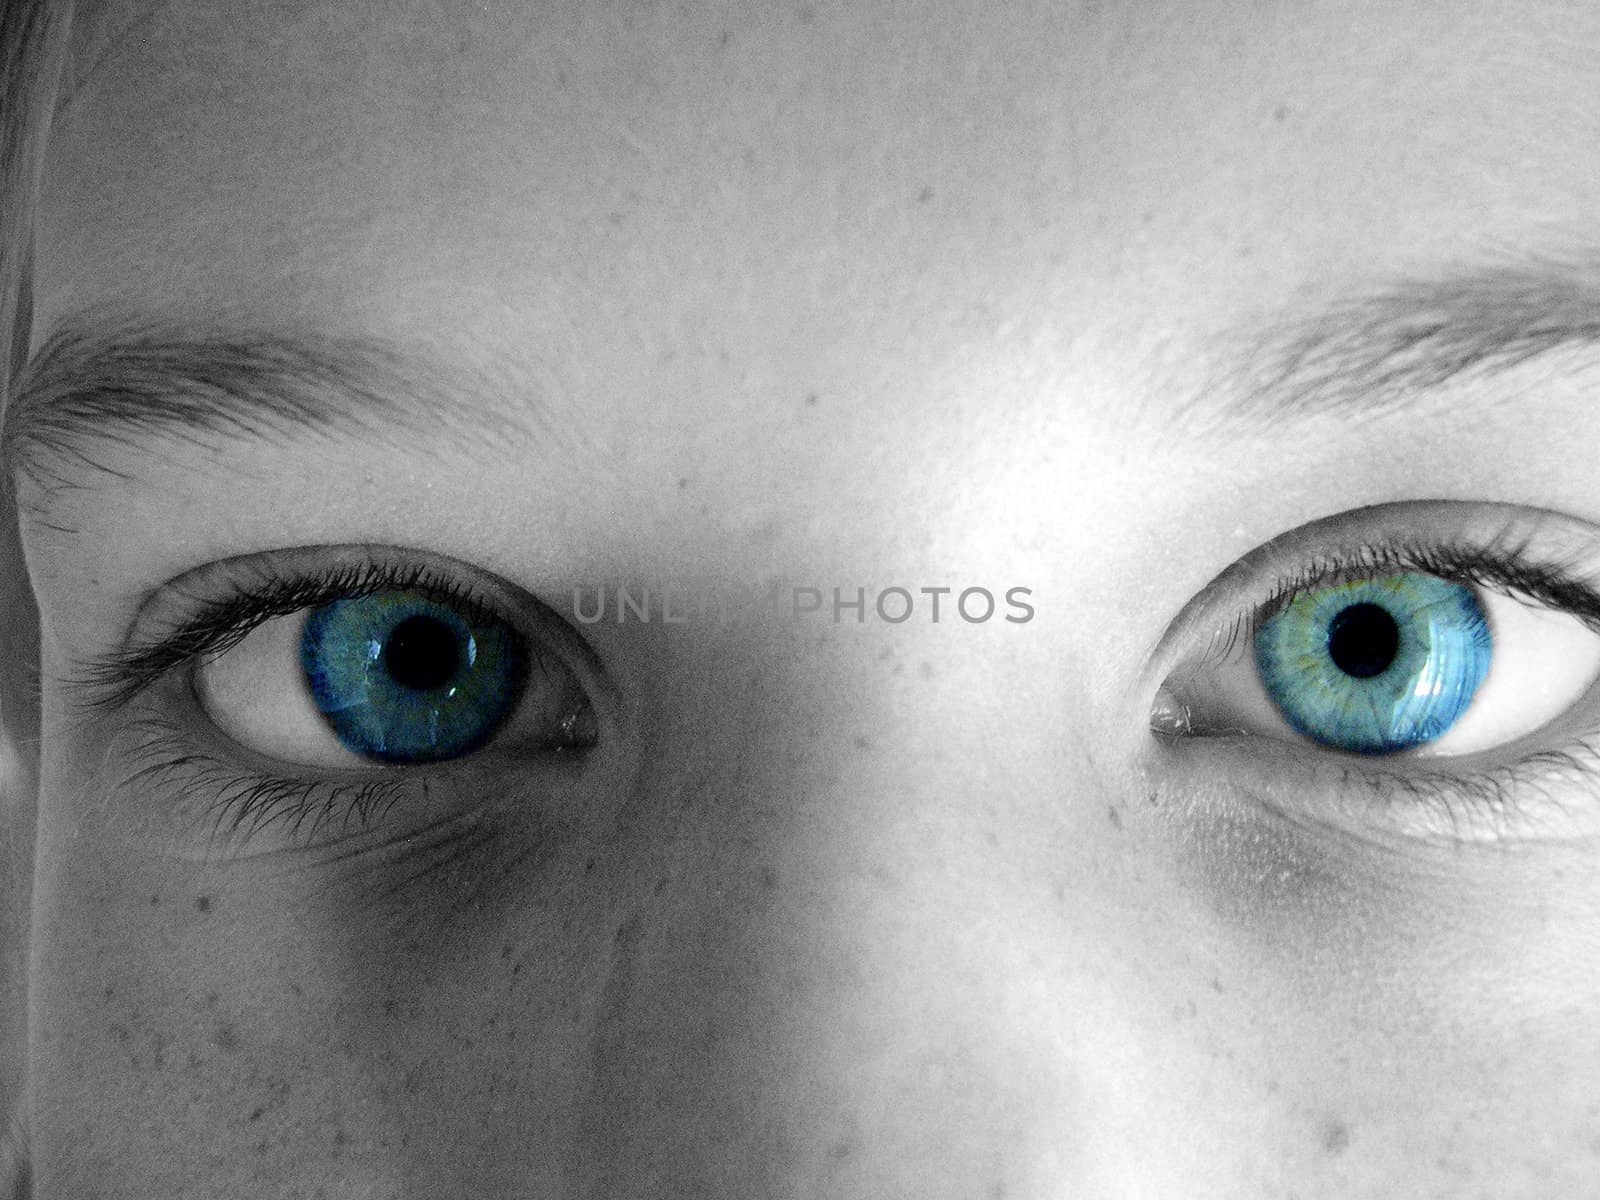 part of a face with blue eyes staring out.